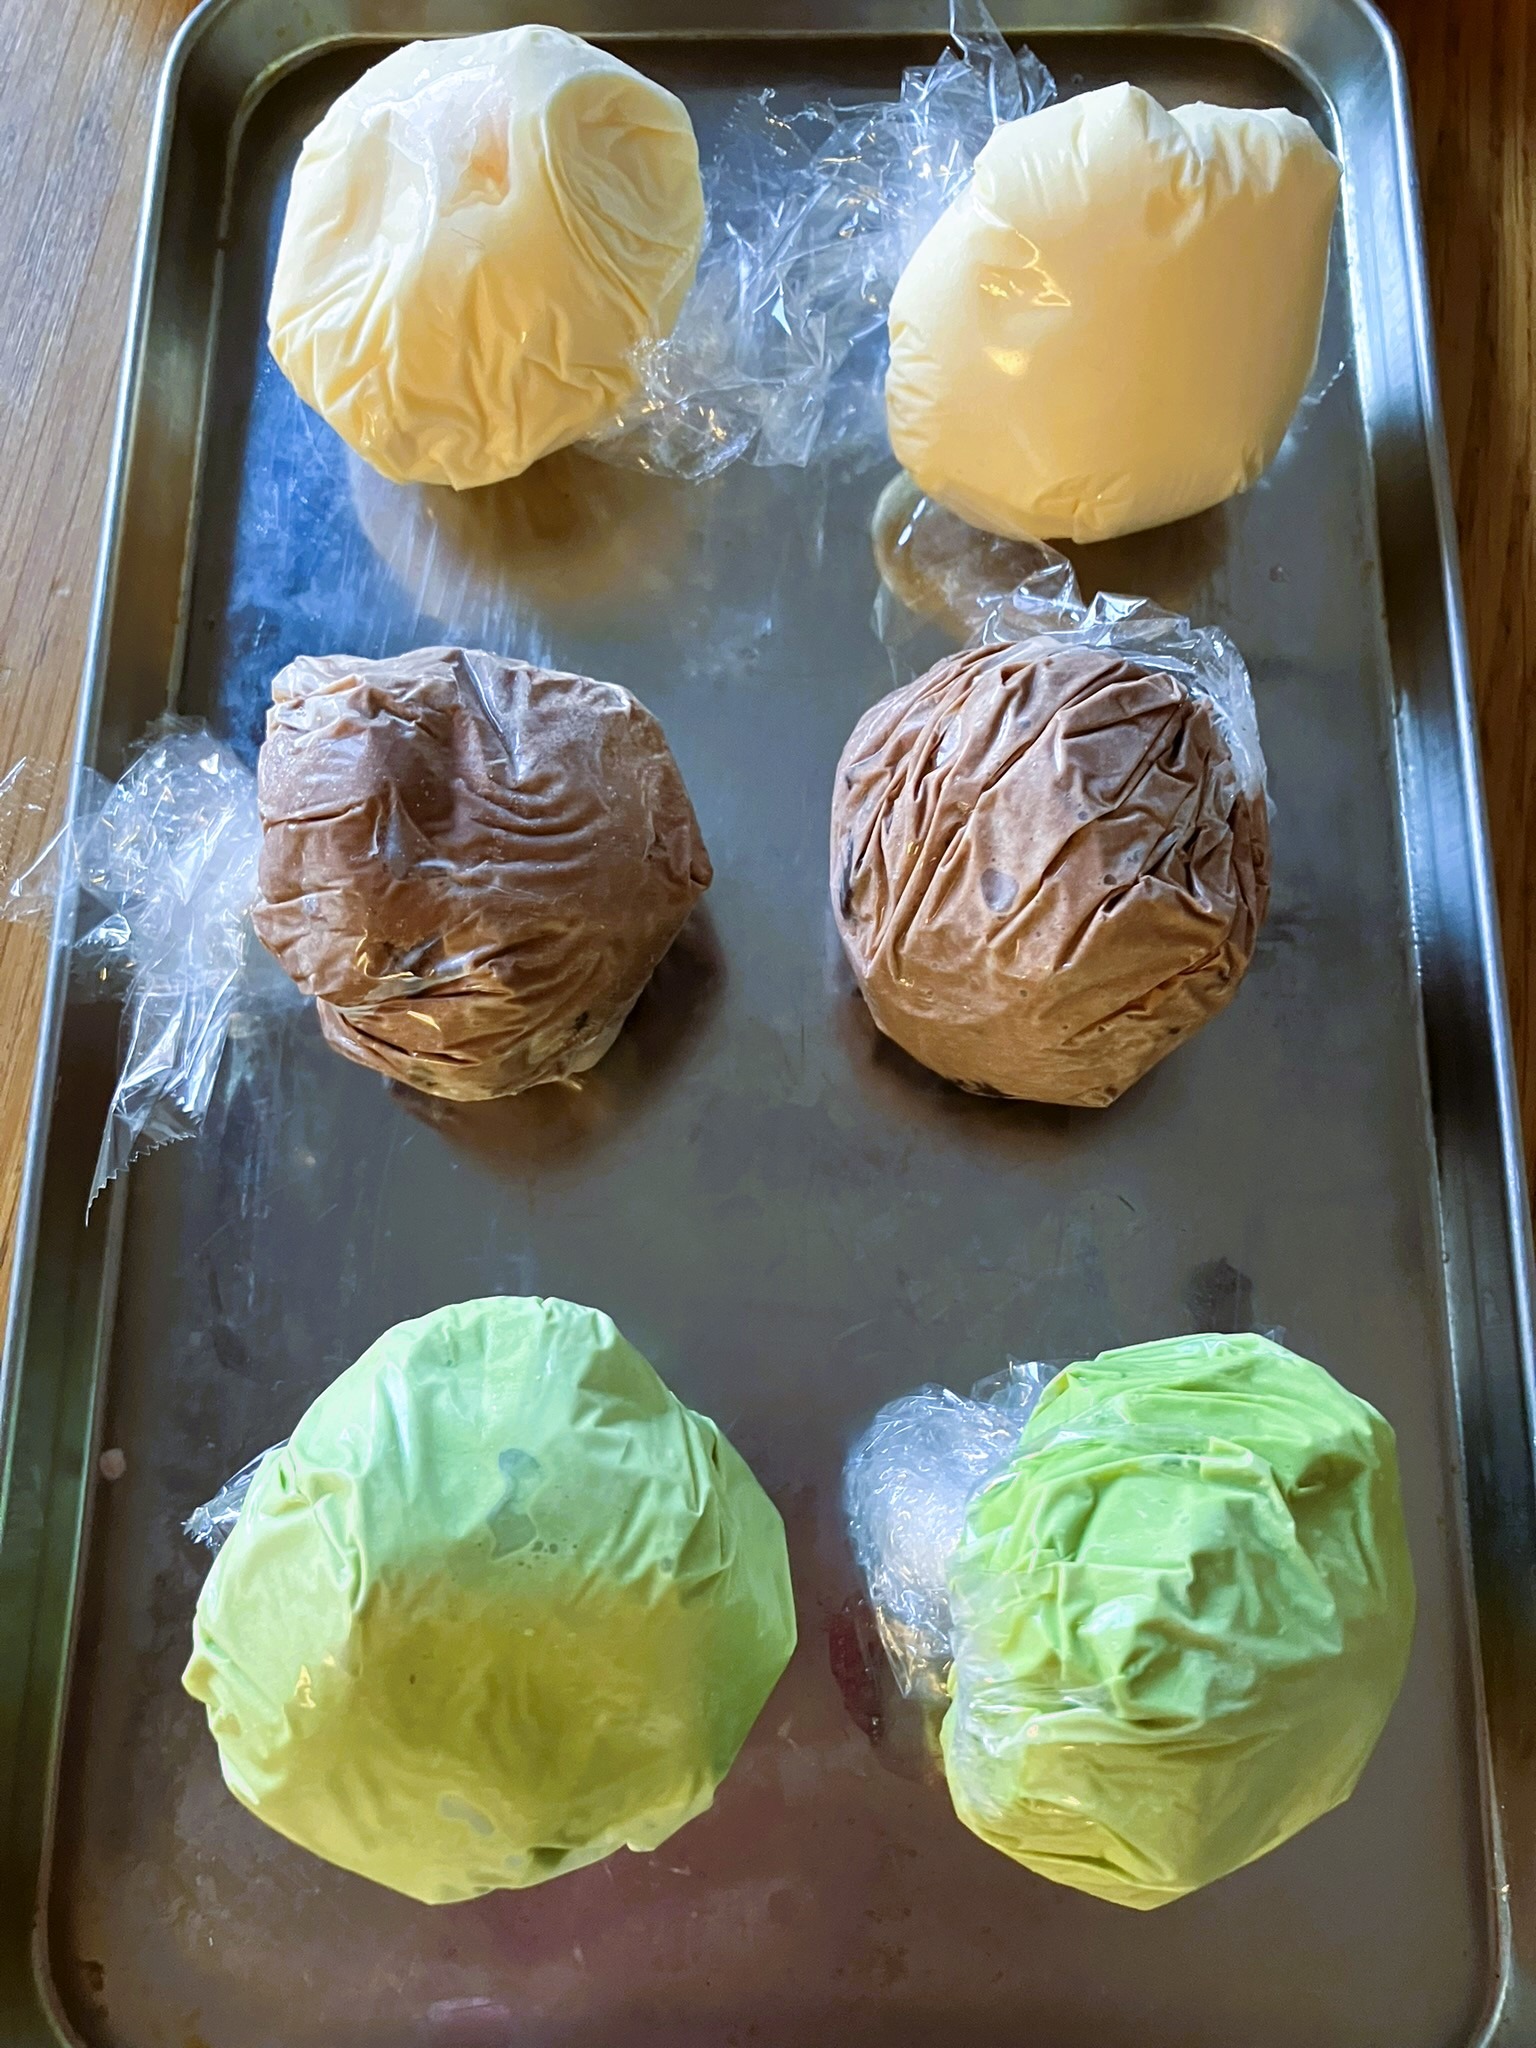 Mochi ice cream - how to make it at home - Chopstick Chronicles